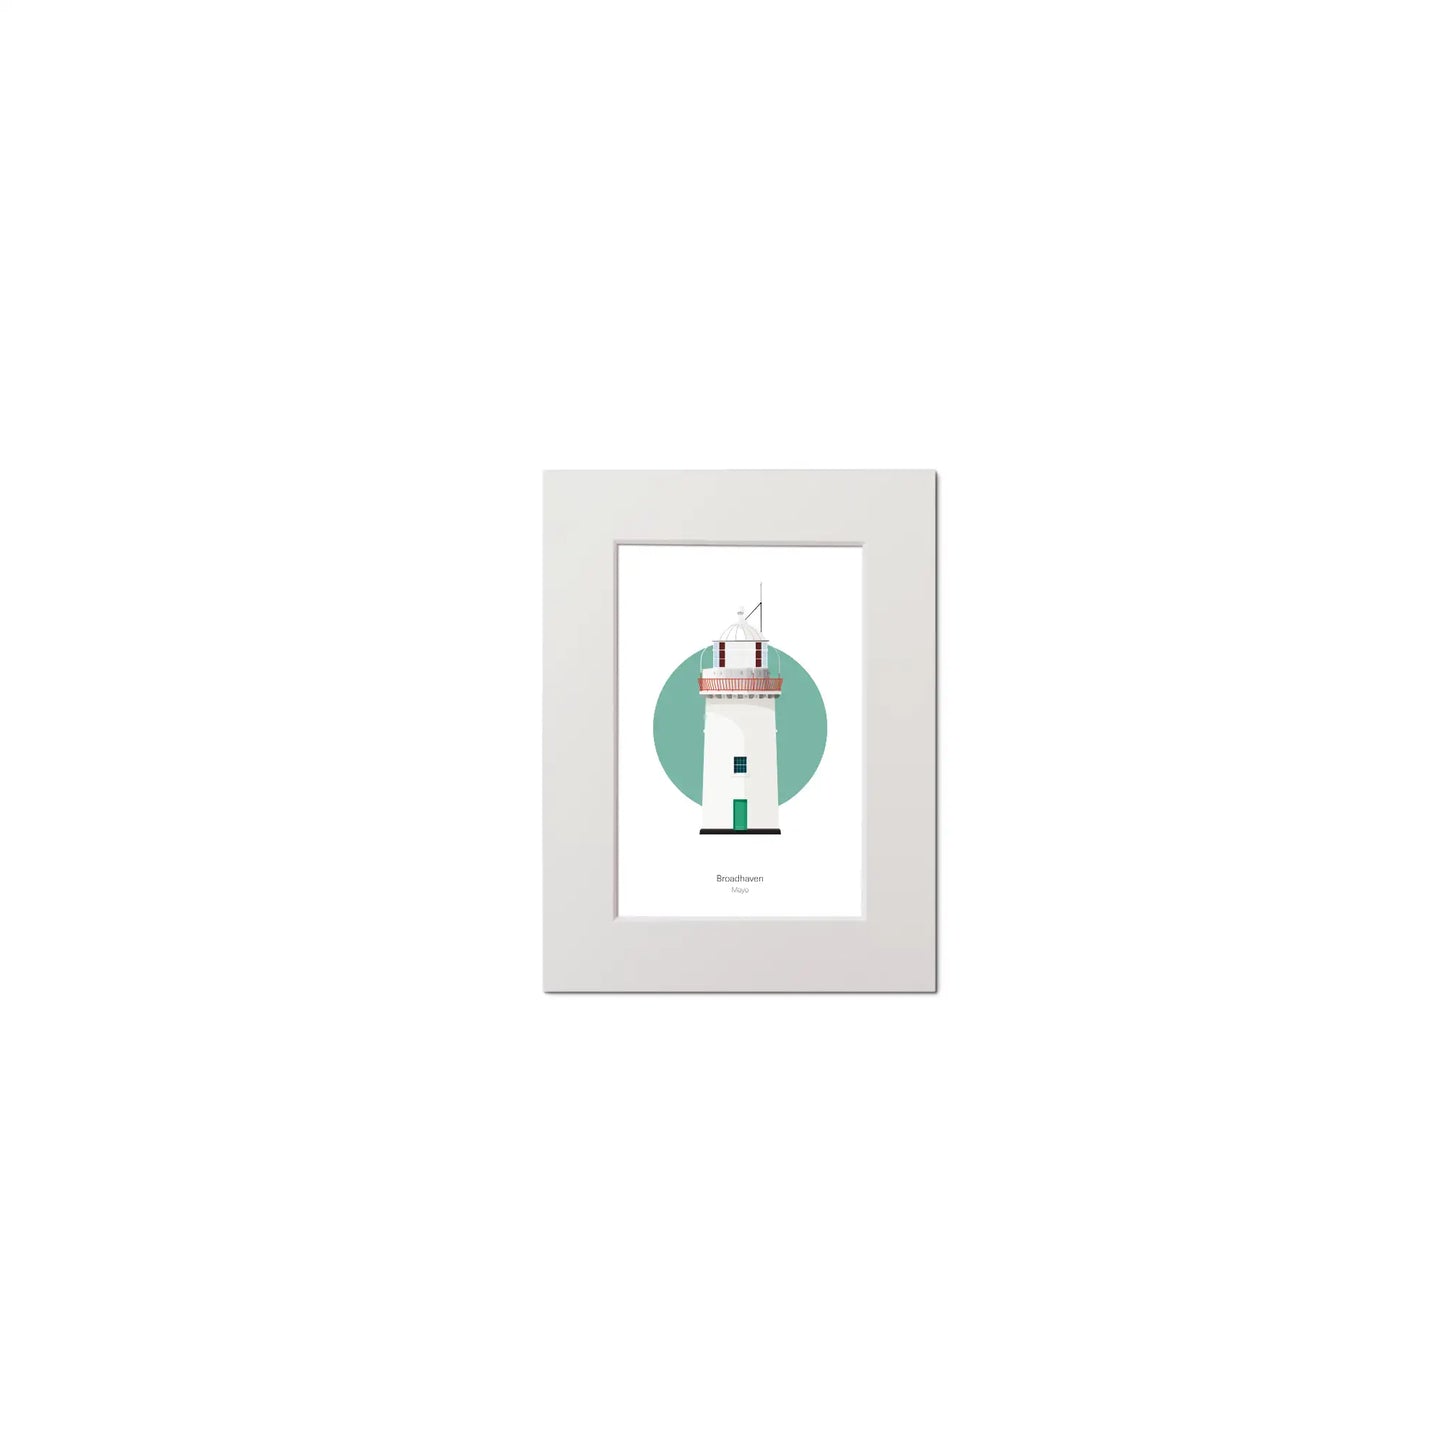 Illustration of Broadhaven lighthouse on a white background inside light blue square, mounted and measuring 15x20cm.